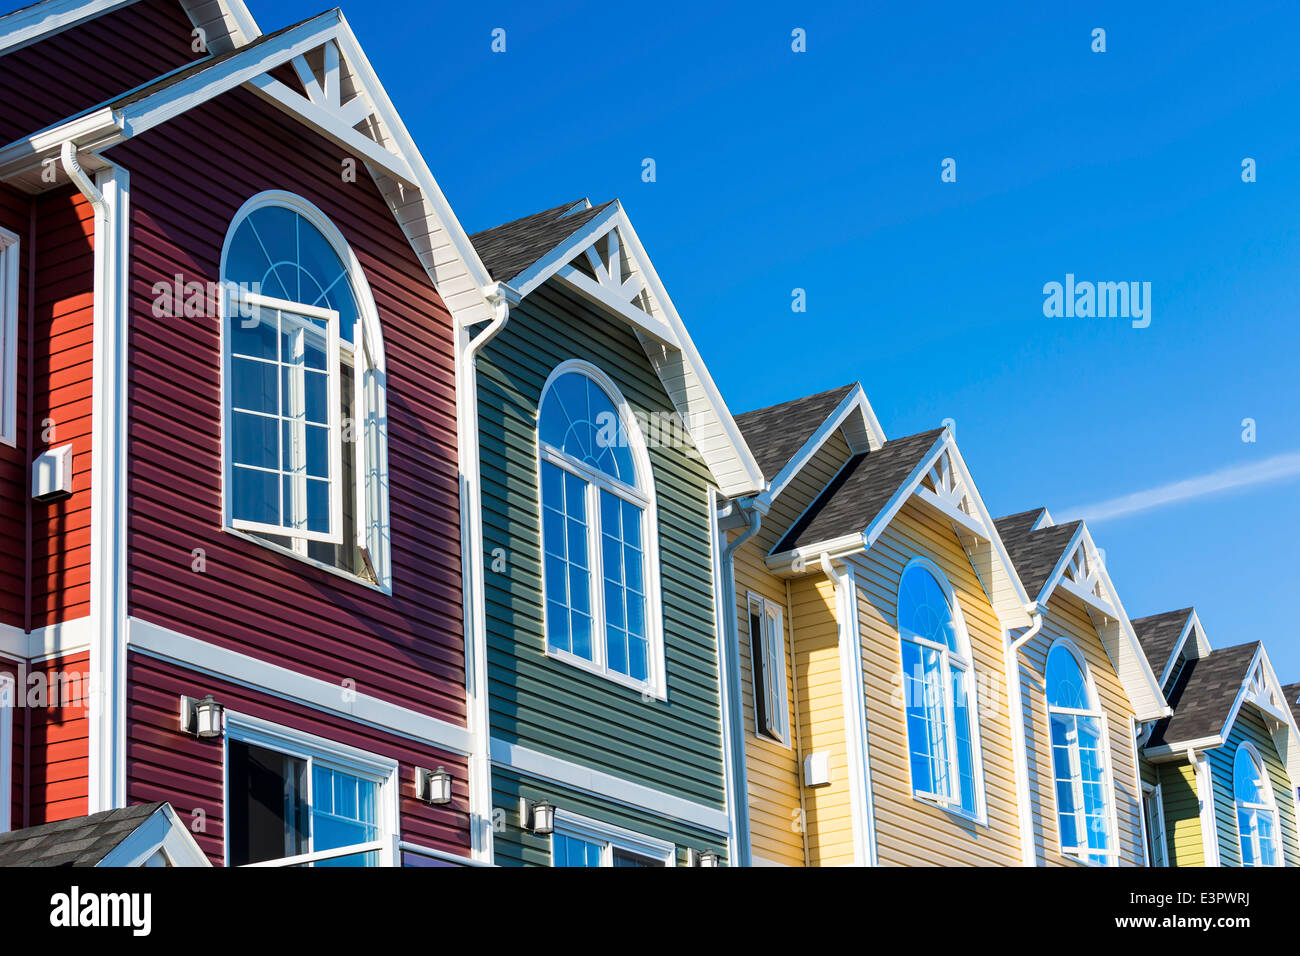 A row of colorful new townhouses or condominiums. Stock Photo